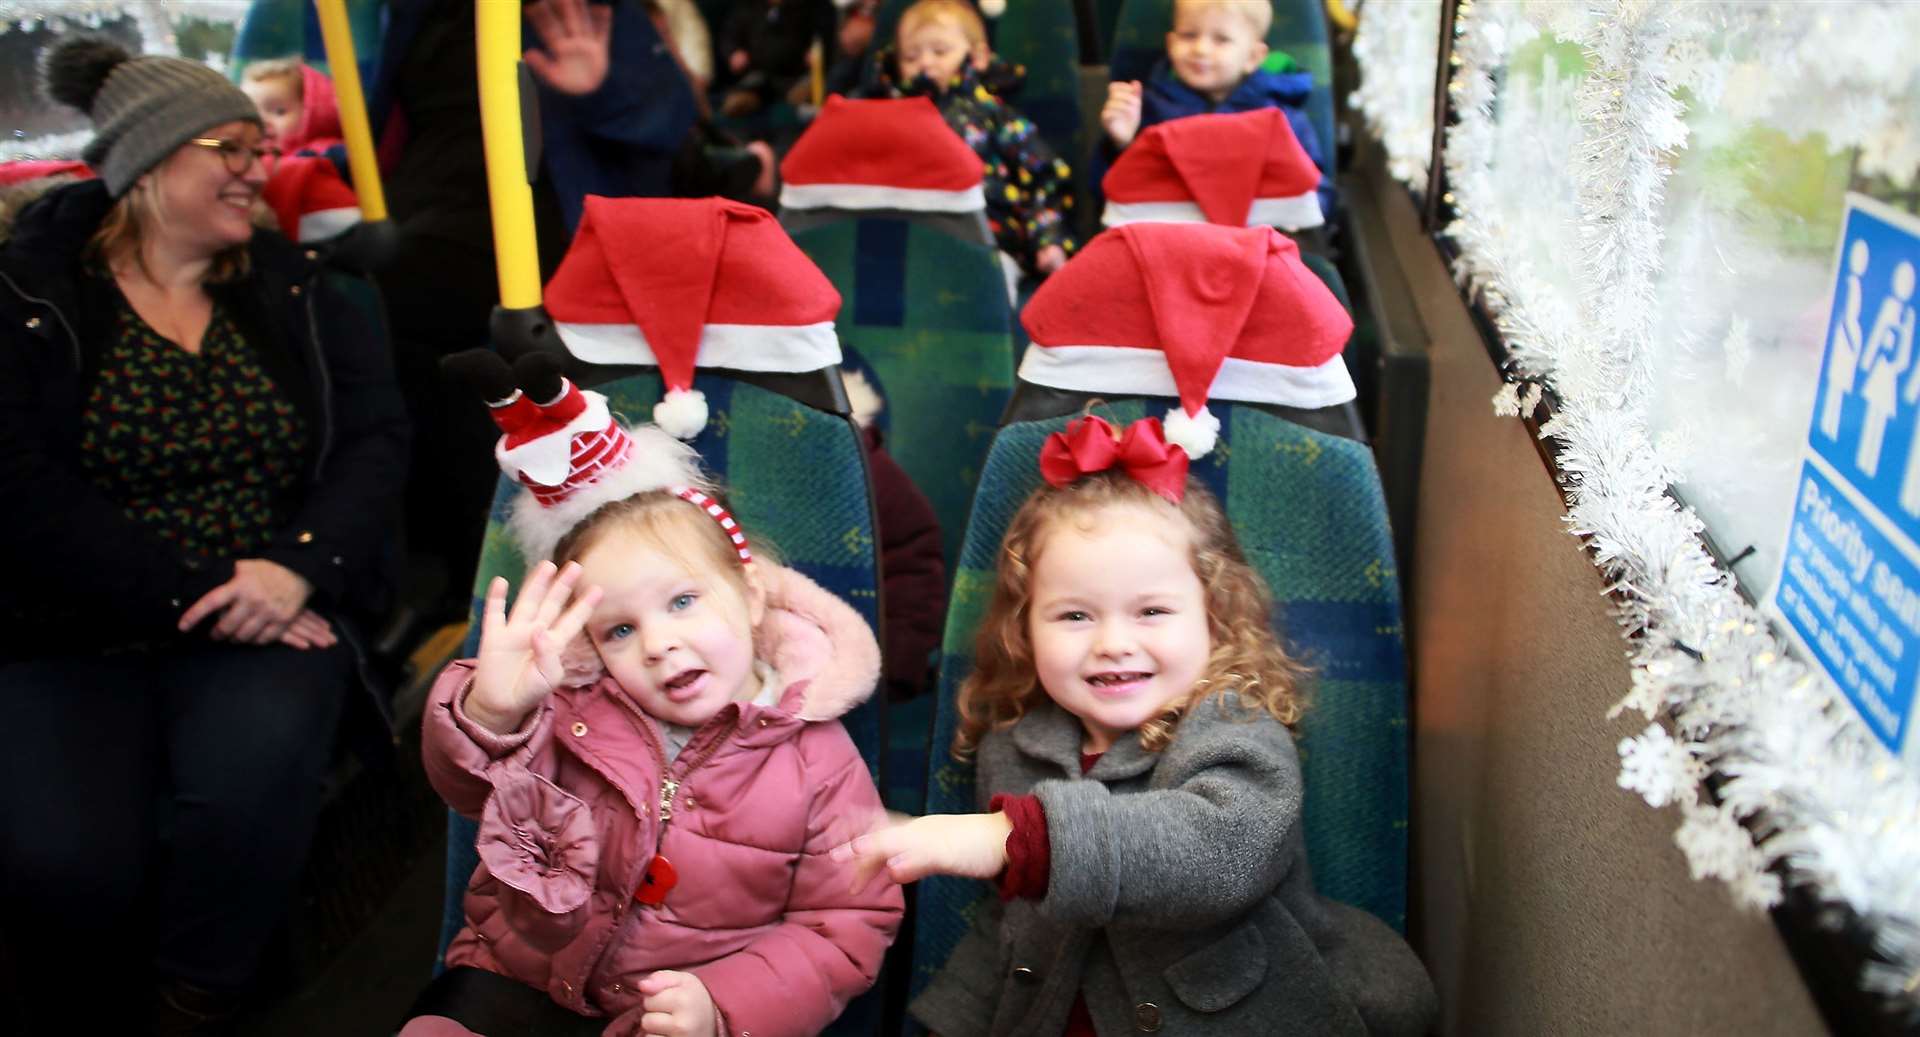 Two little passengers having a lovely time on the Frozen bus. Picture: Phil Lee